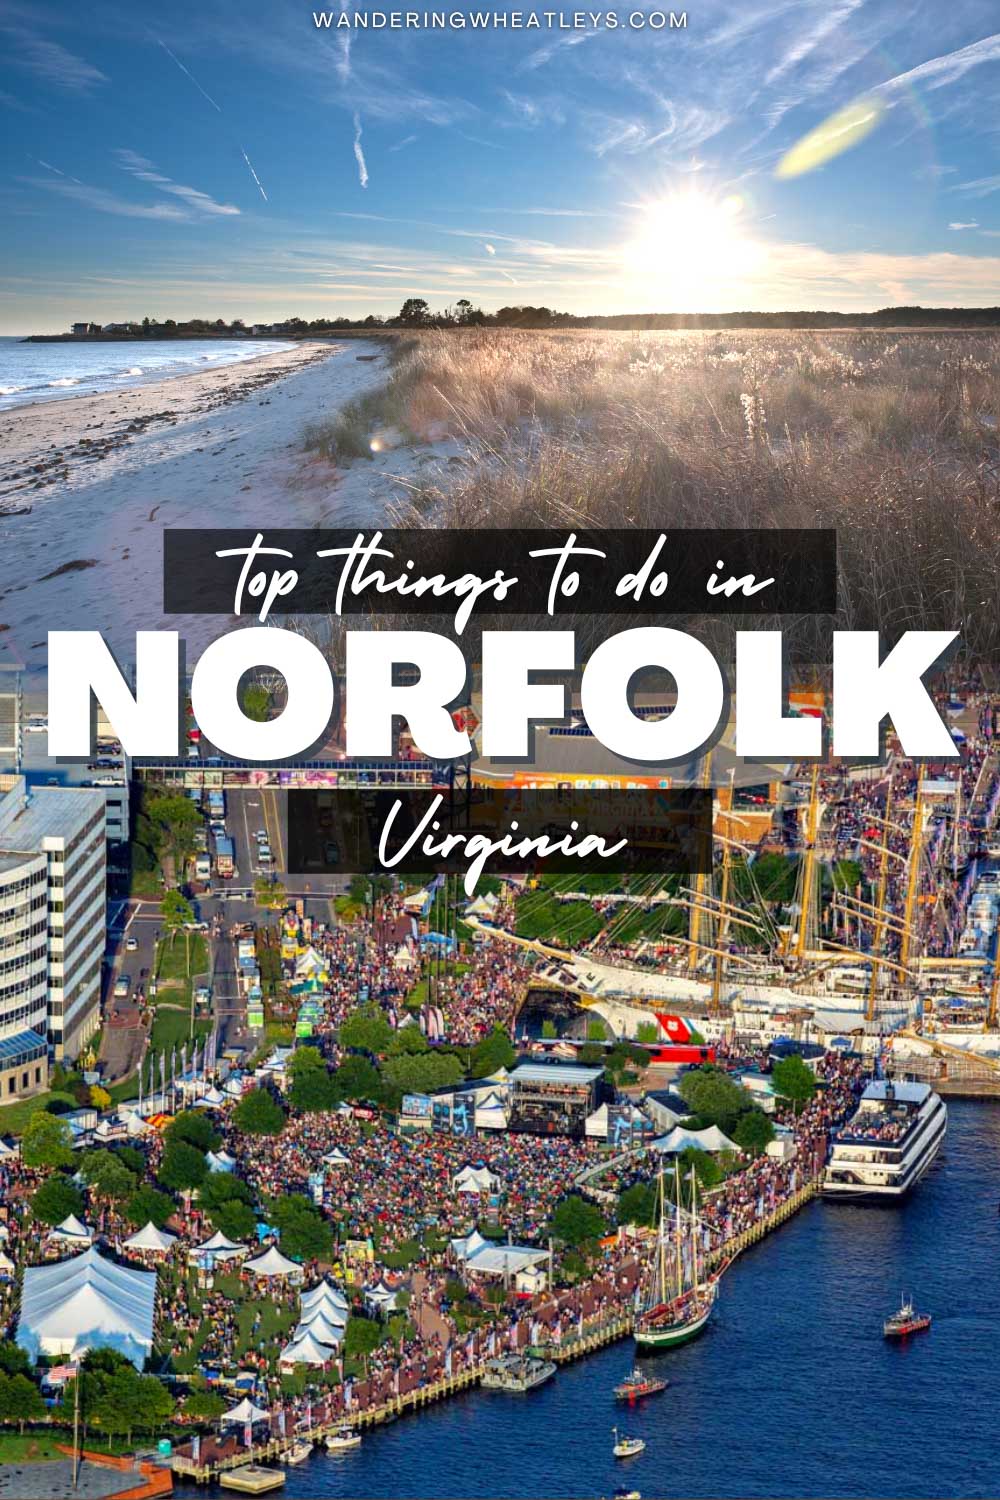 The Best Things to do in Norfolk, Virginia